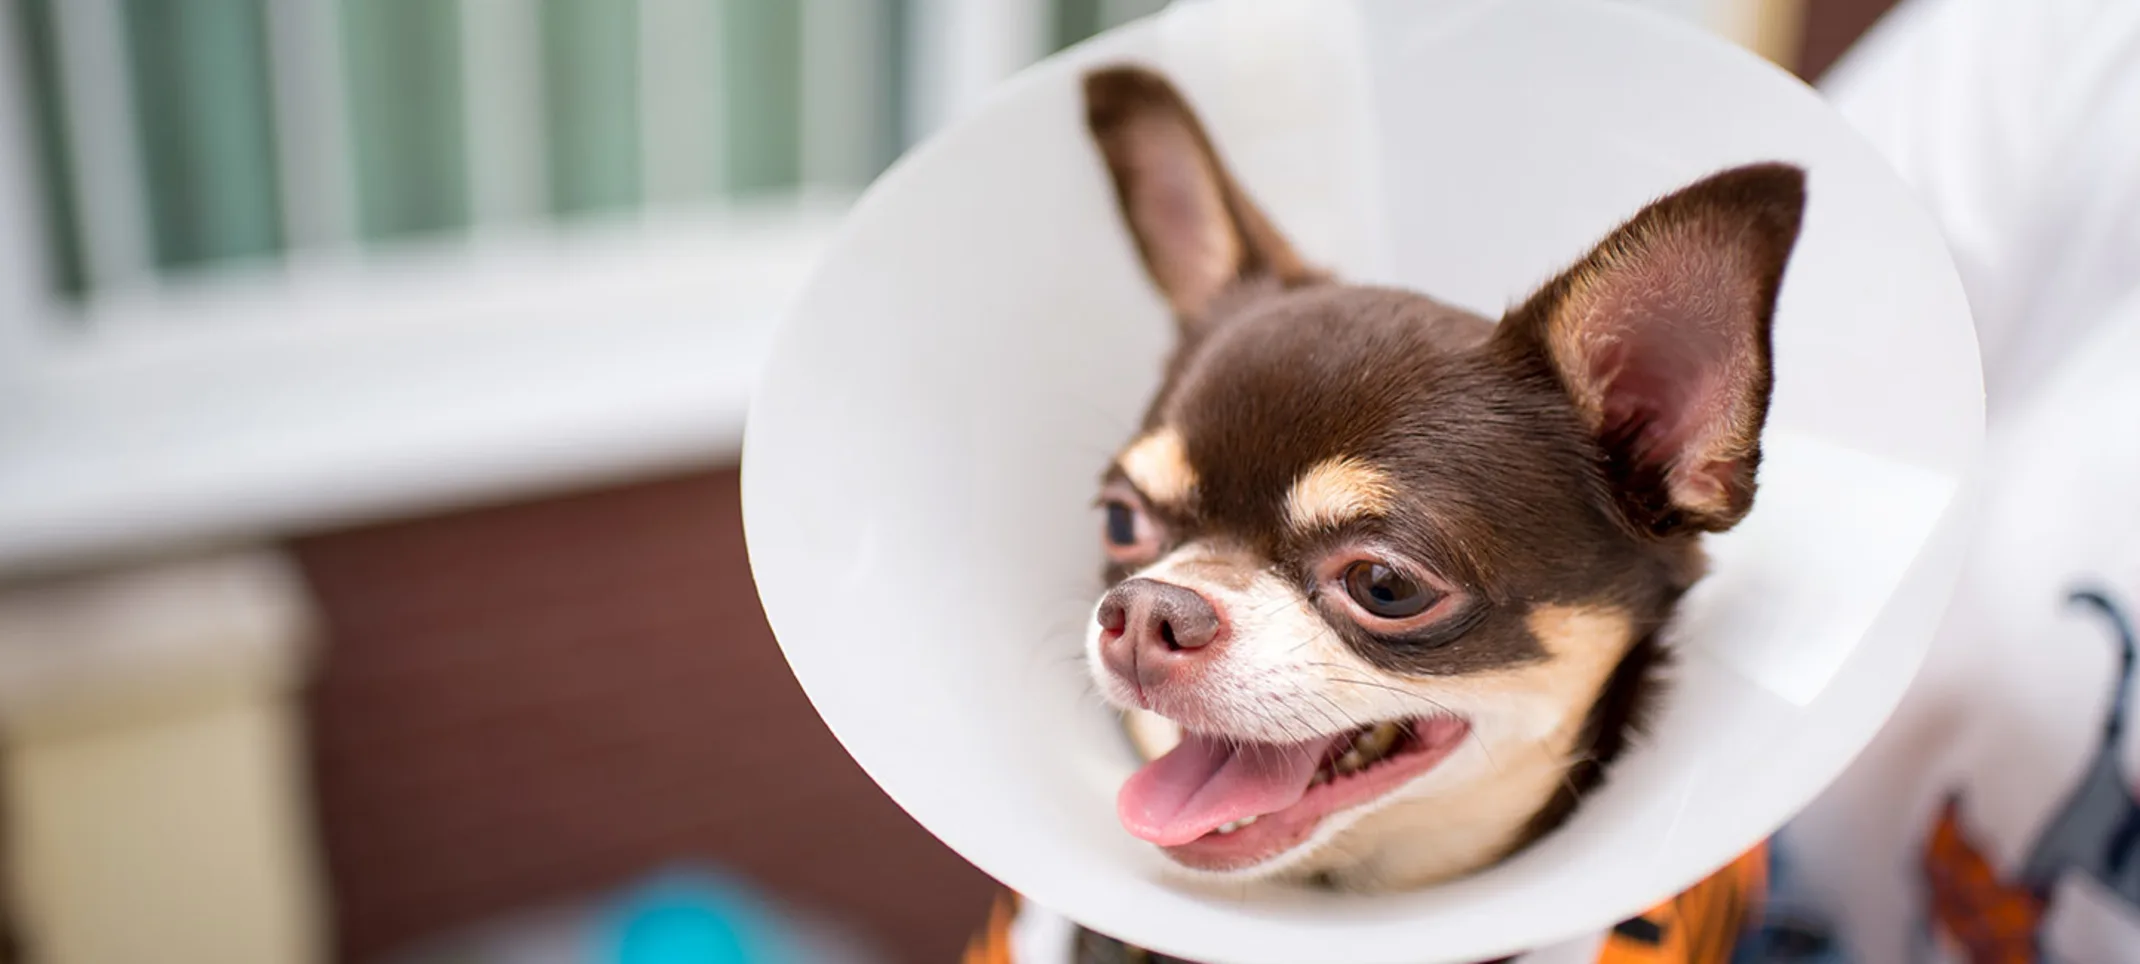 Dog with cone around its neck being held by staff member